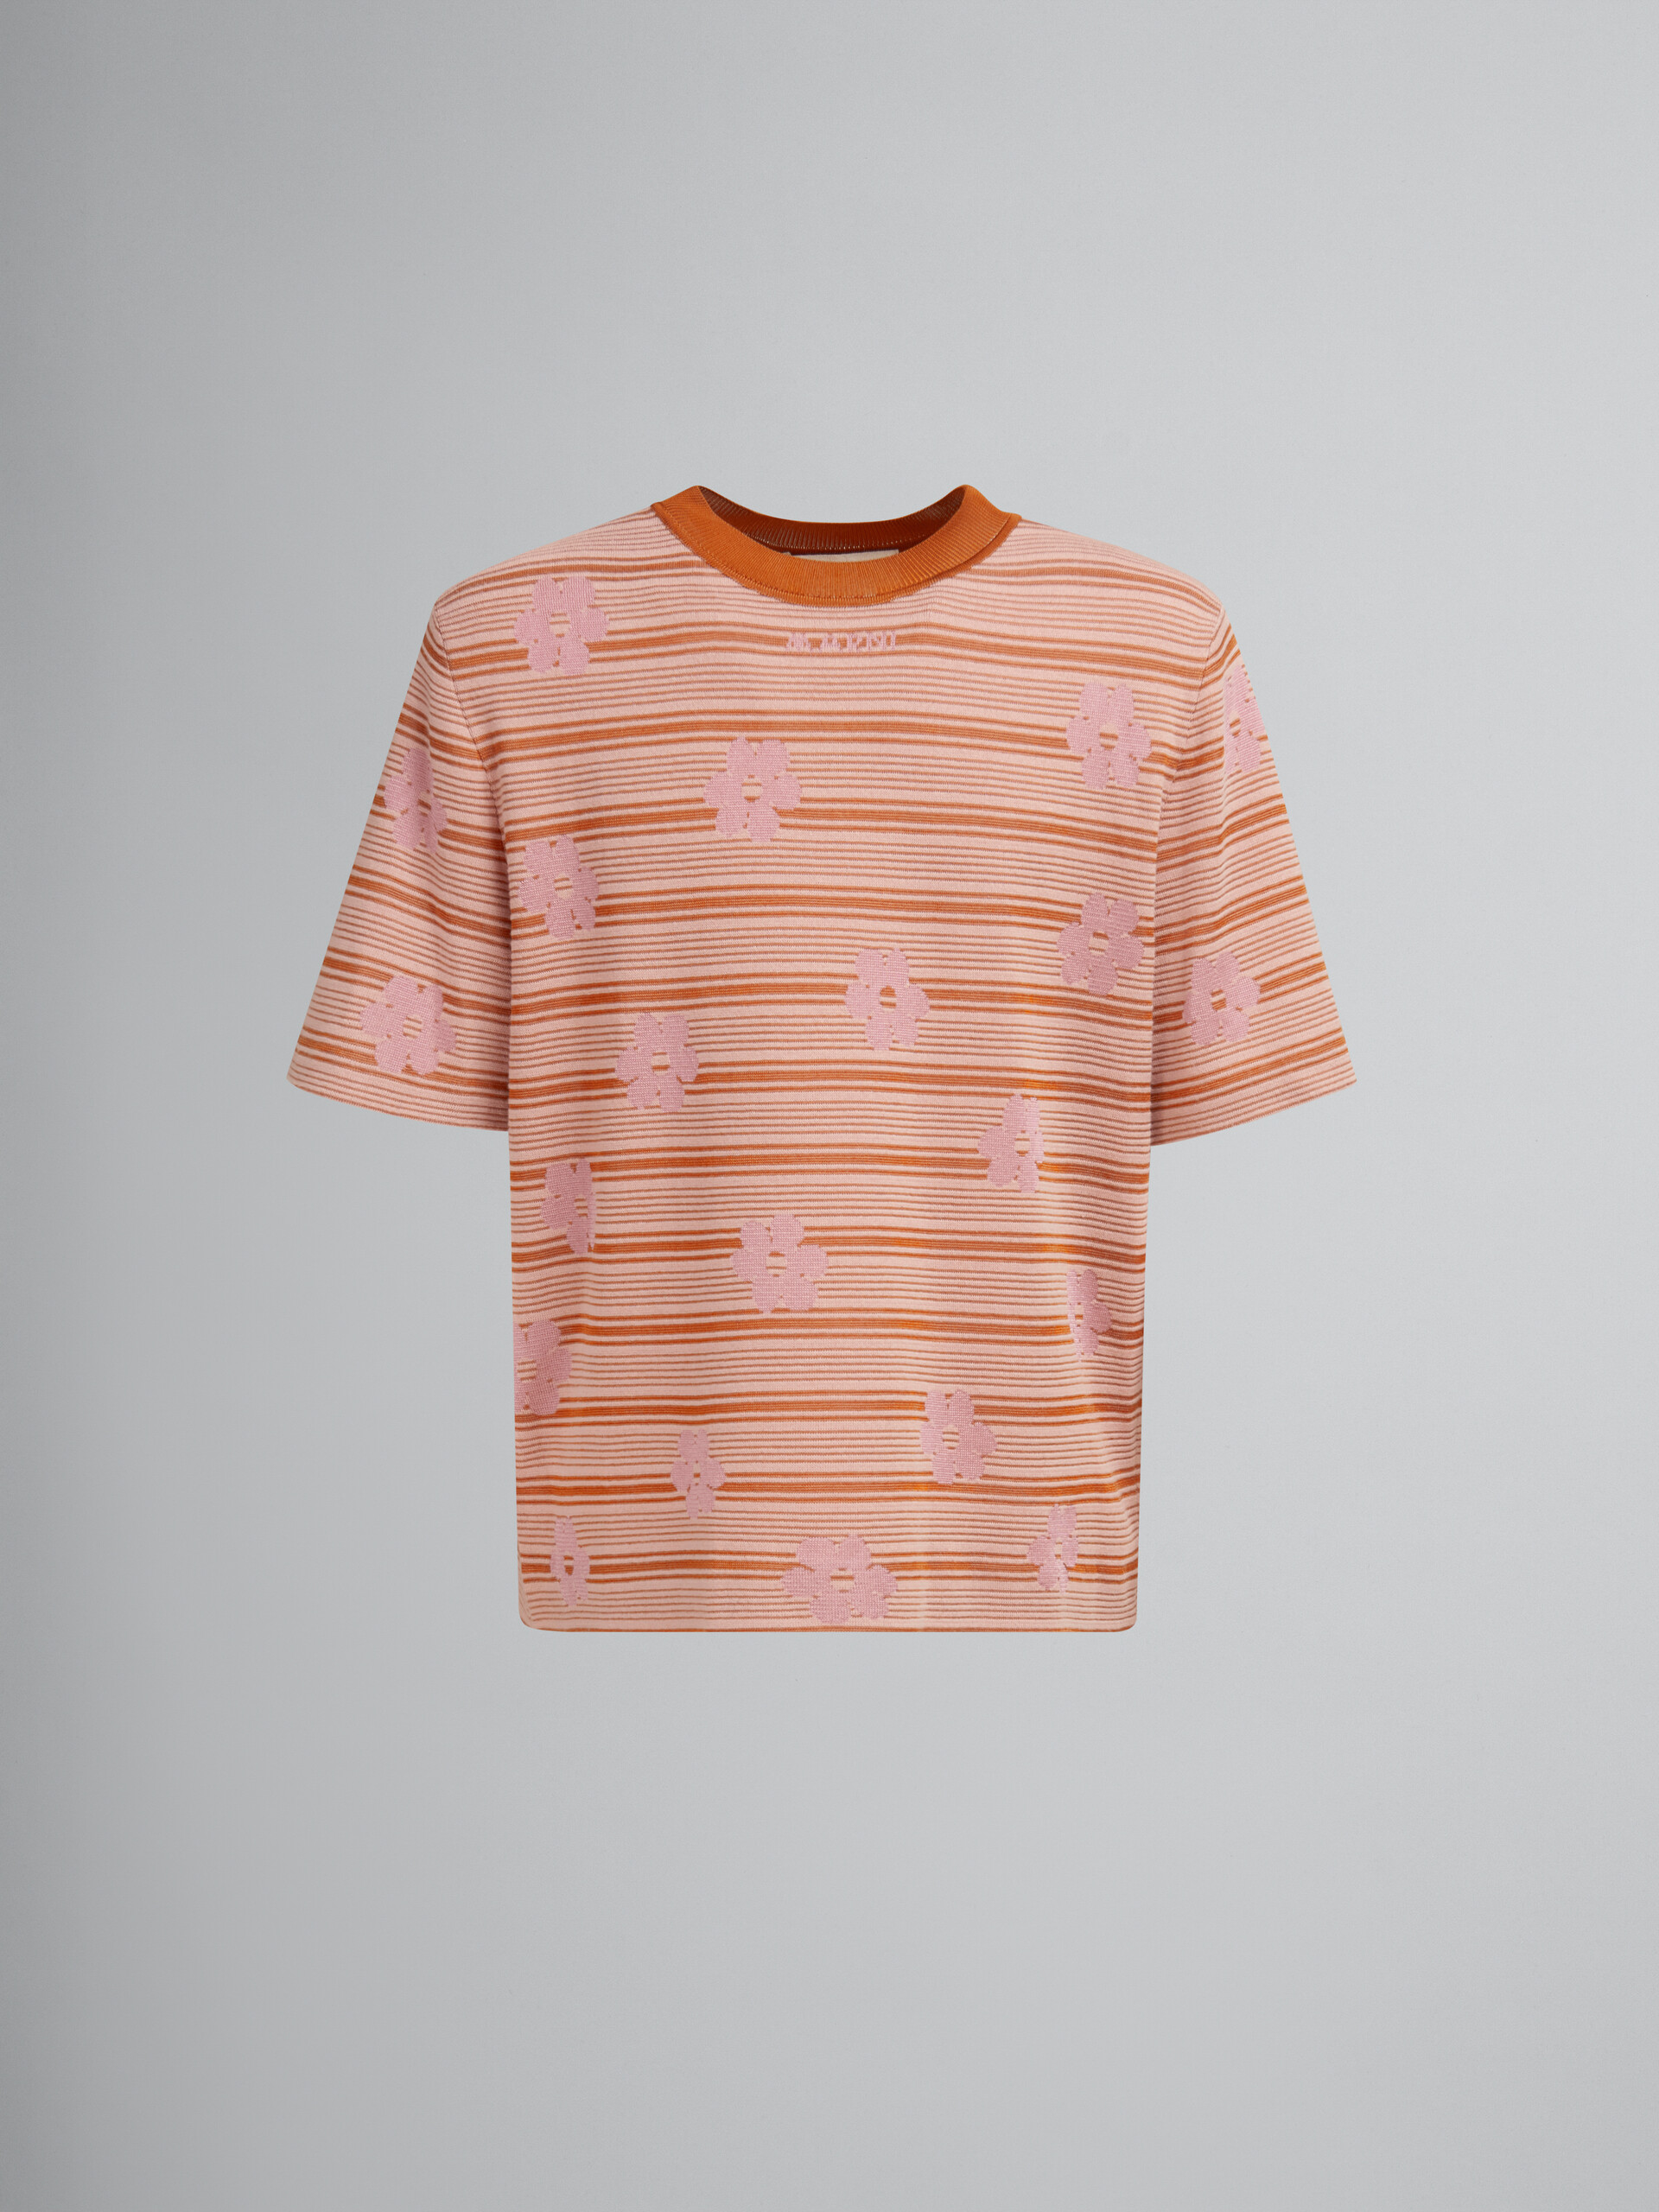 Pink cotton-viscose striped knit T-shirt with floral motif - Pullovers - Image 1